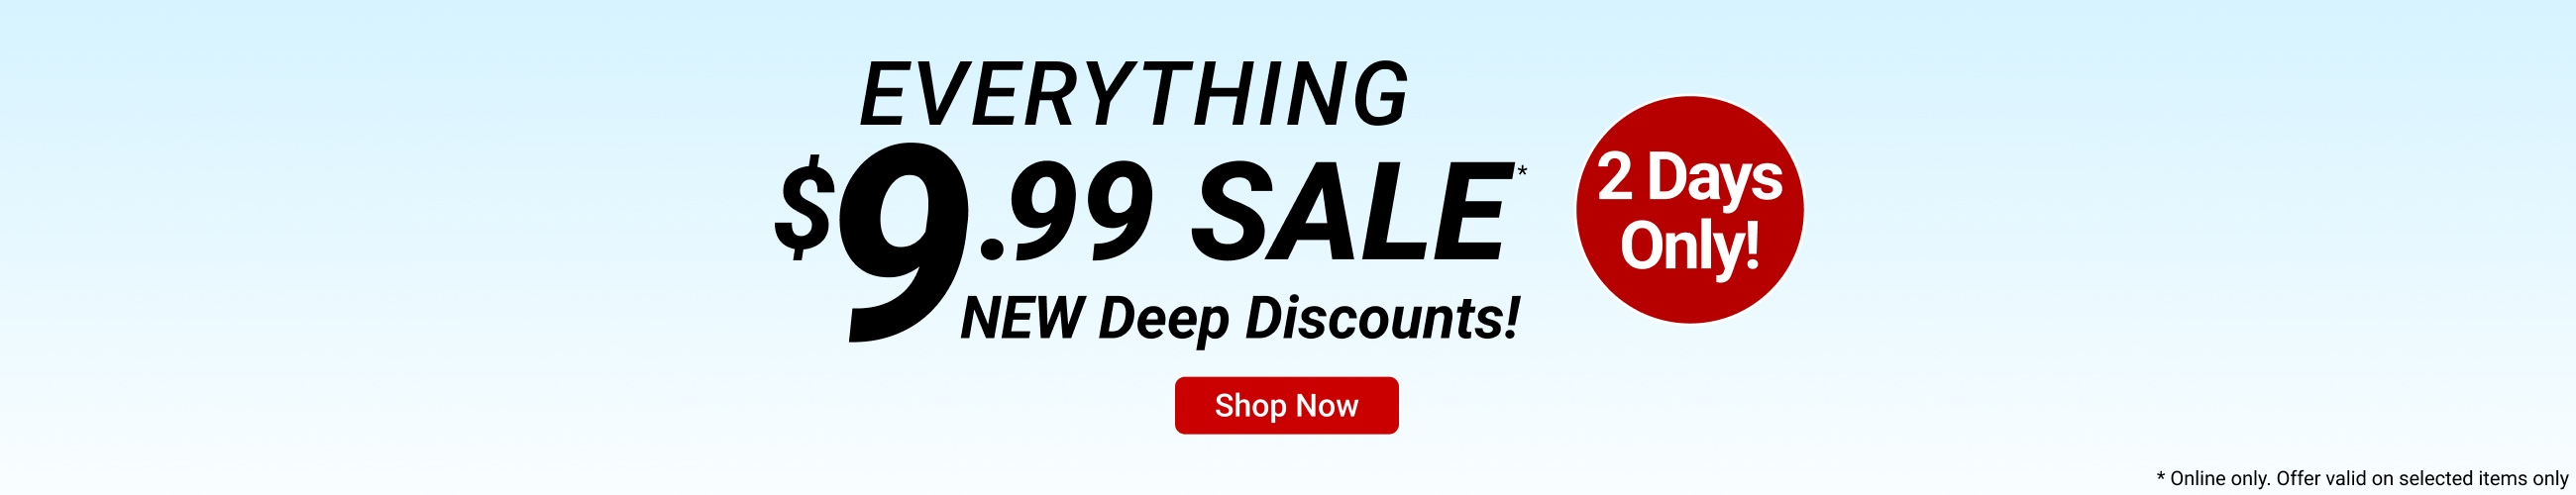 Everything $9.99 sale - shop now